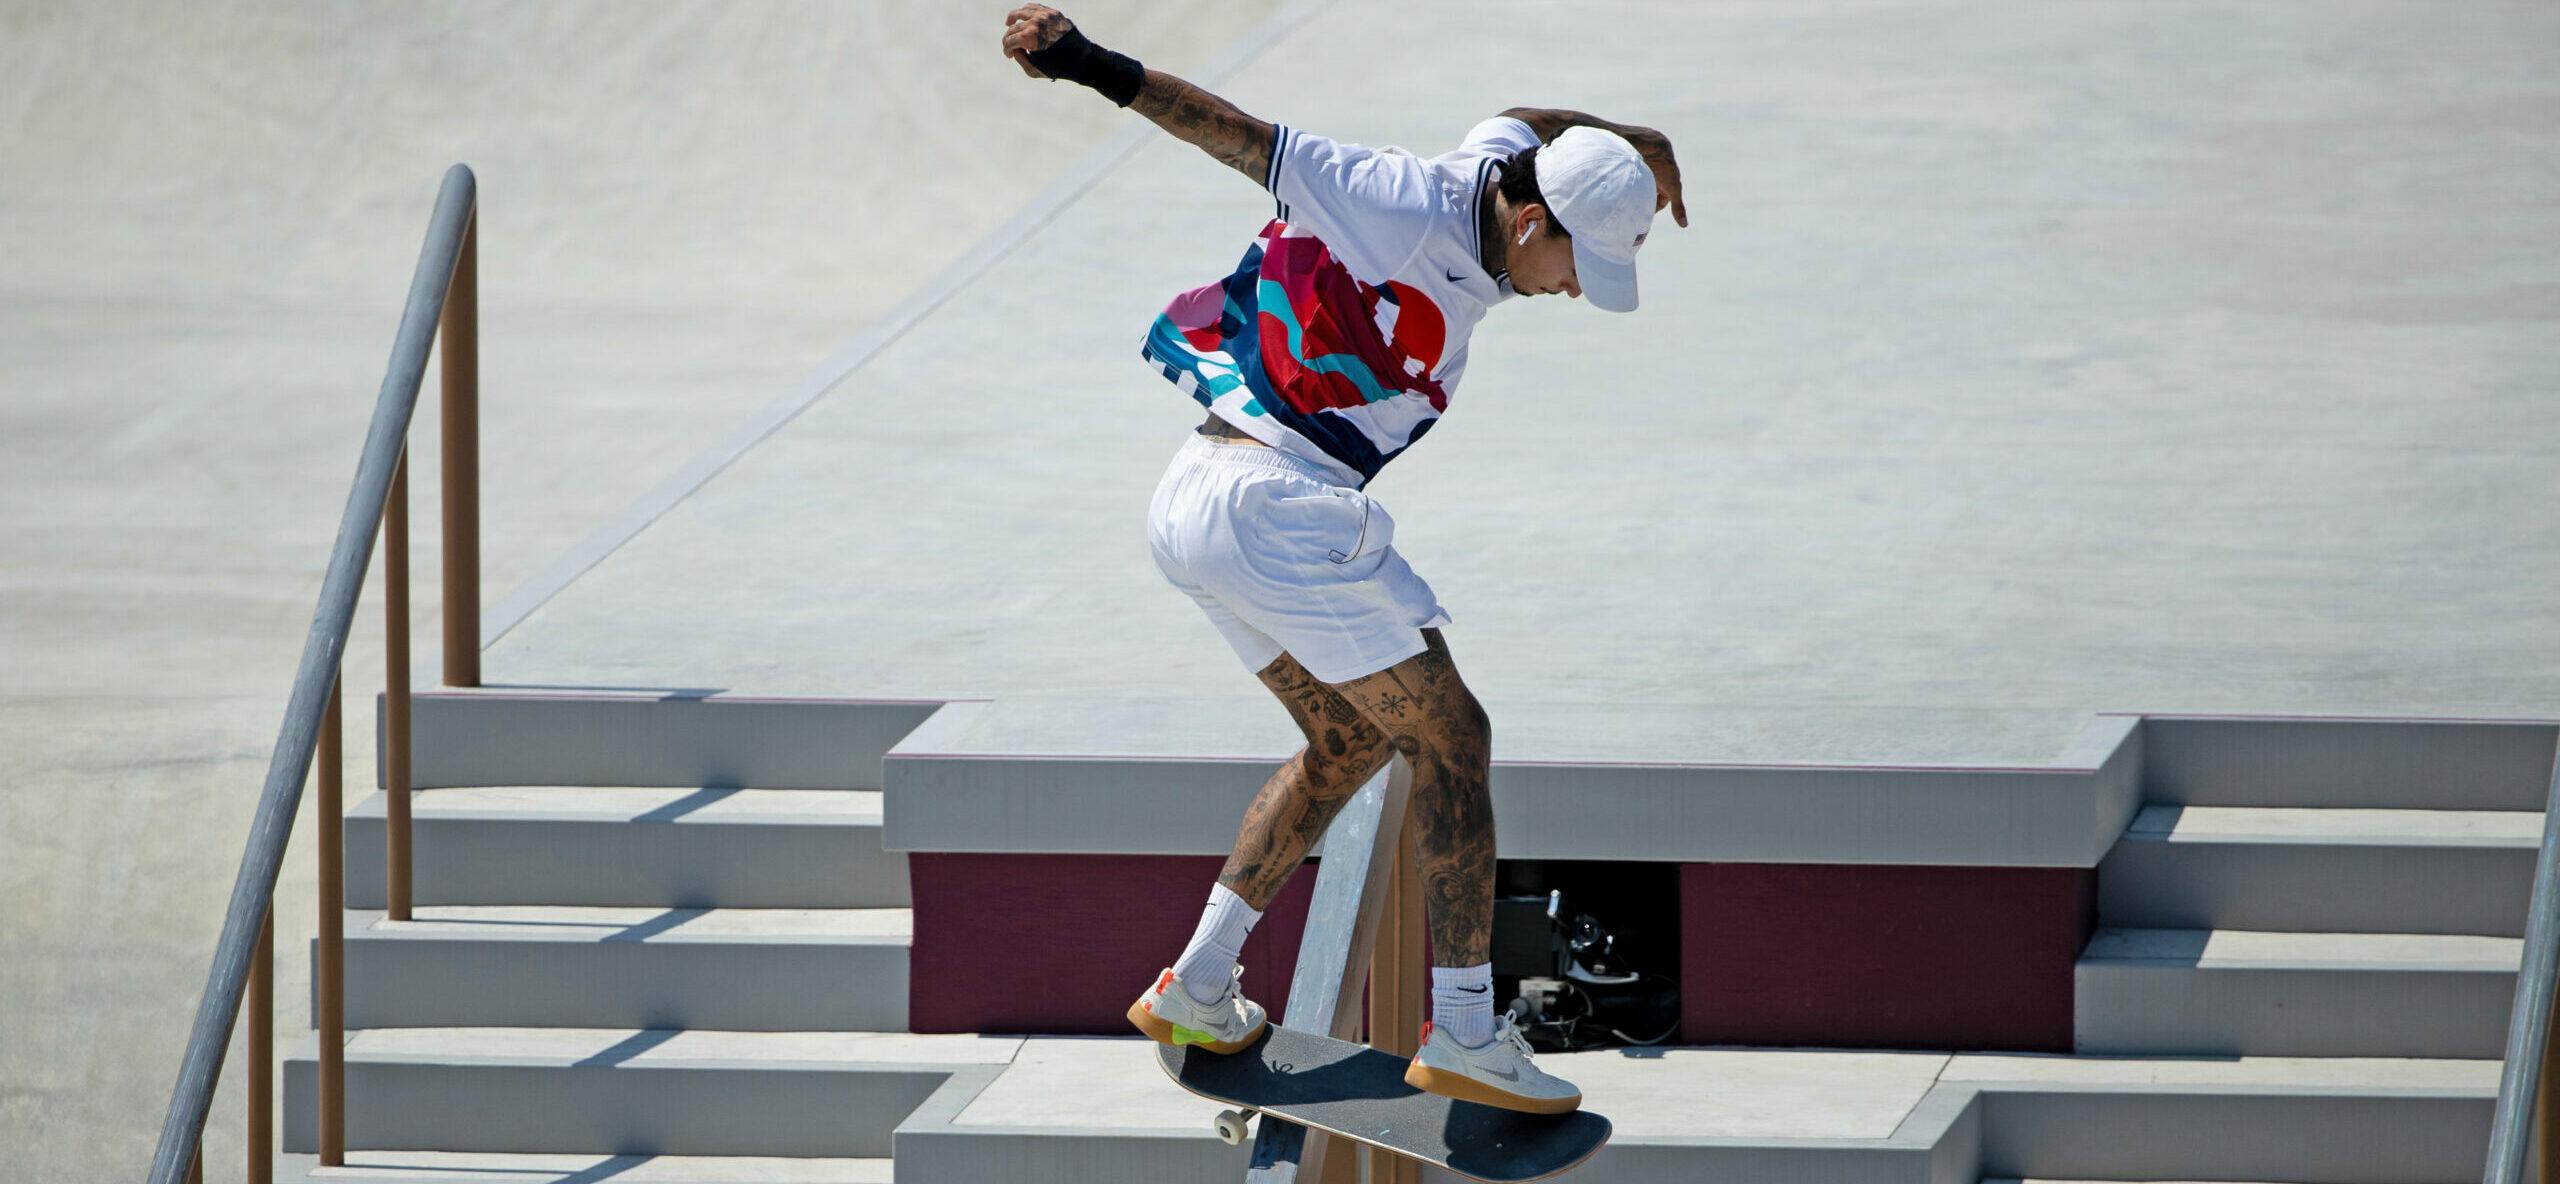 Skateboarder Nyjah Huston Sues ‘Cracked-Out Zombie’ Over Alleged Assault